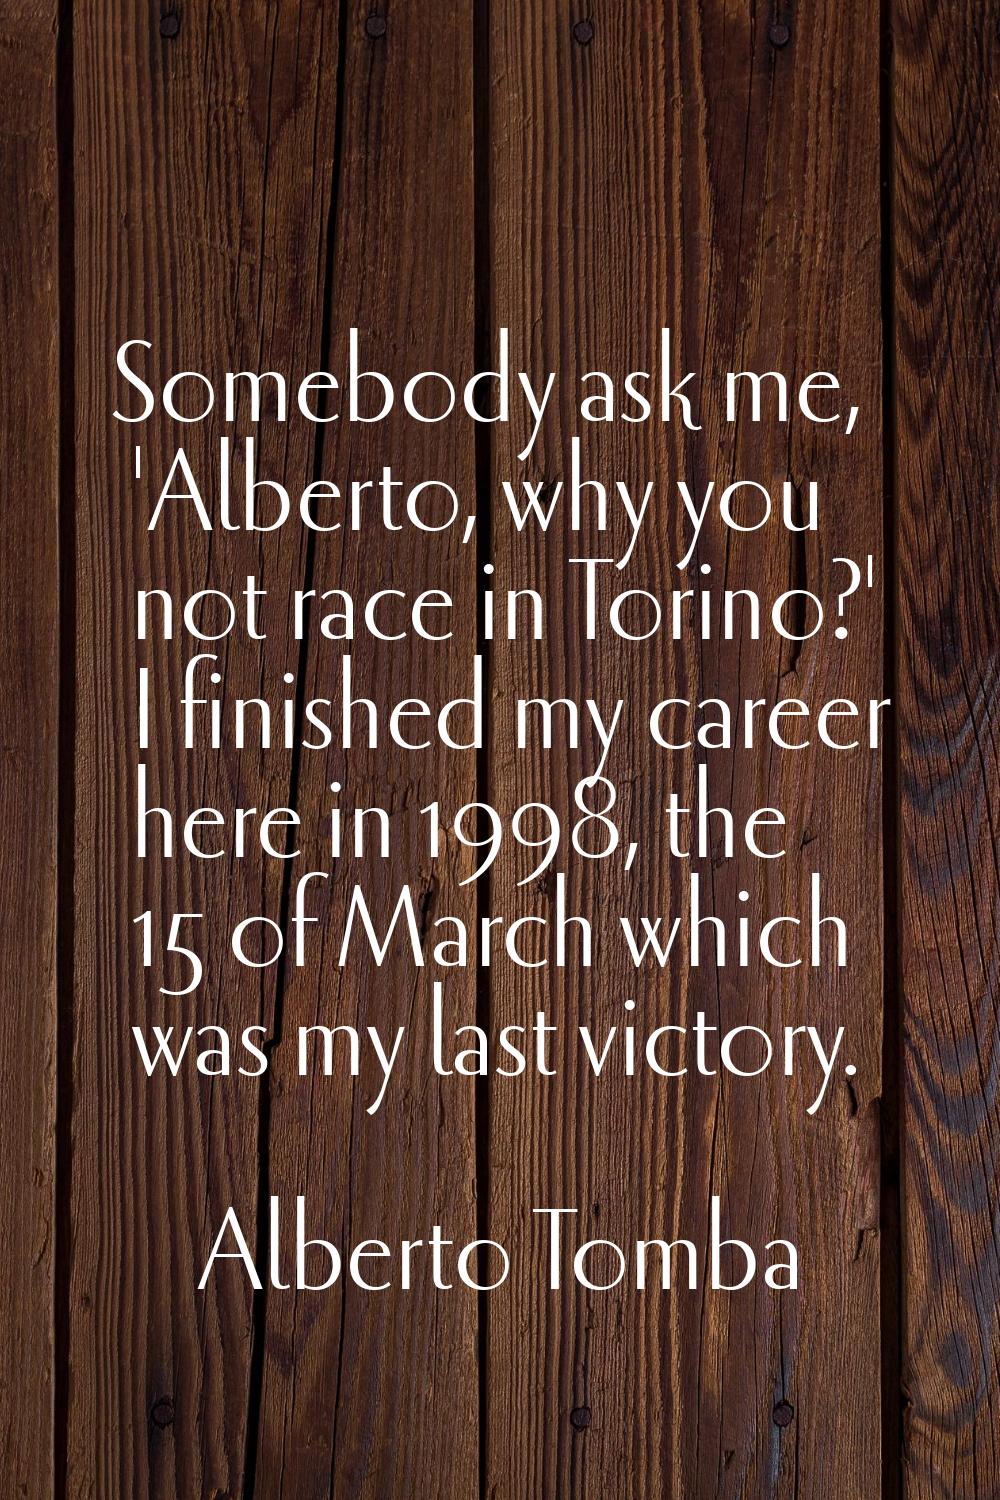 Somebody ask me, 'Alberto, why you not race in Torino?' I finished my career here in 1998, the 15 o